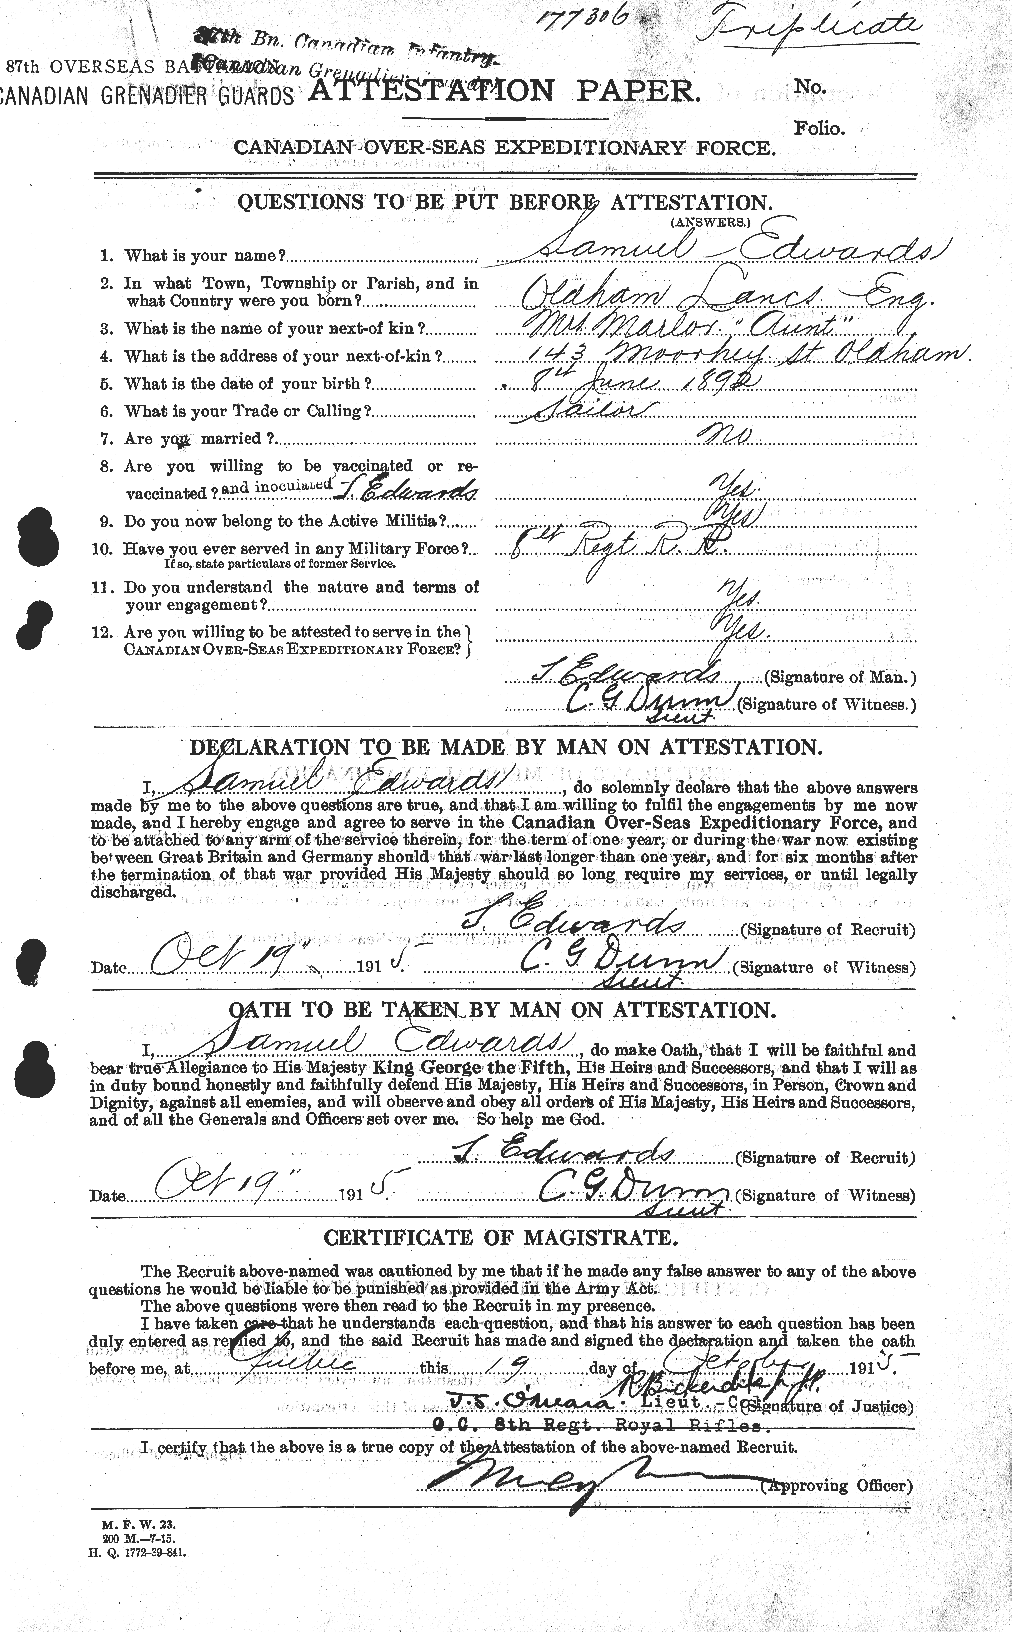 Personnel Records of the First World War - CEF 310305a